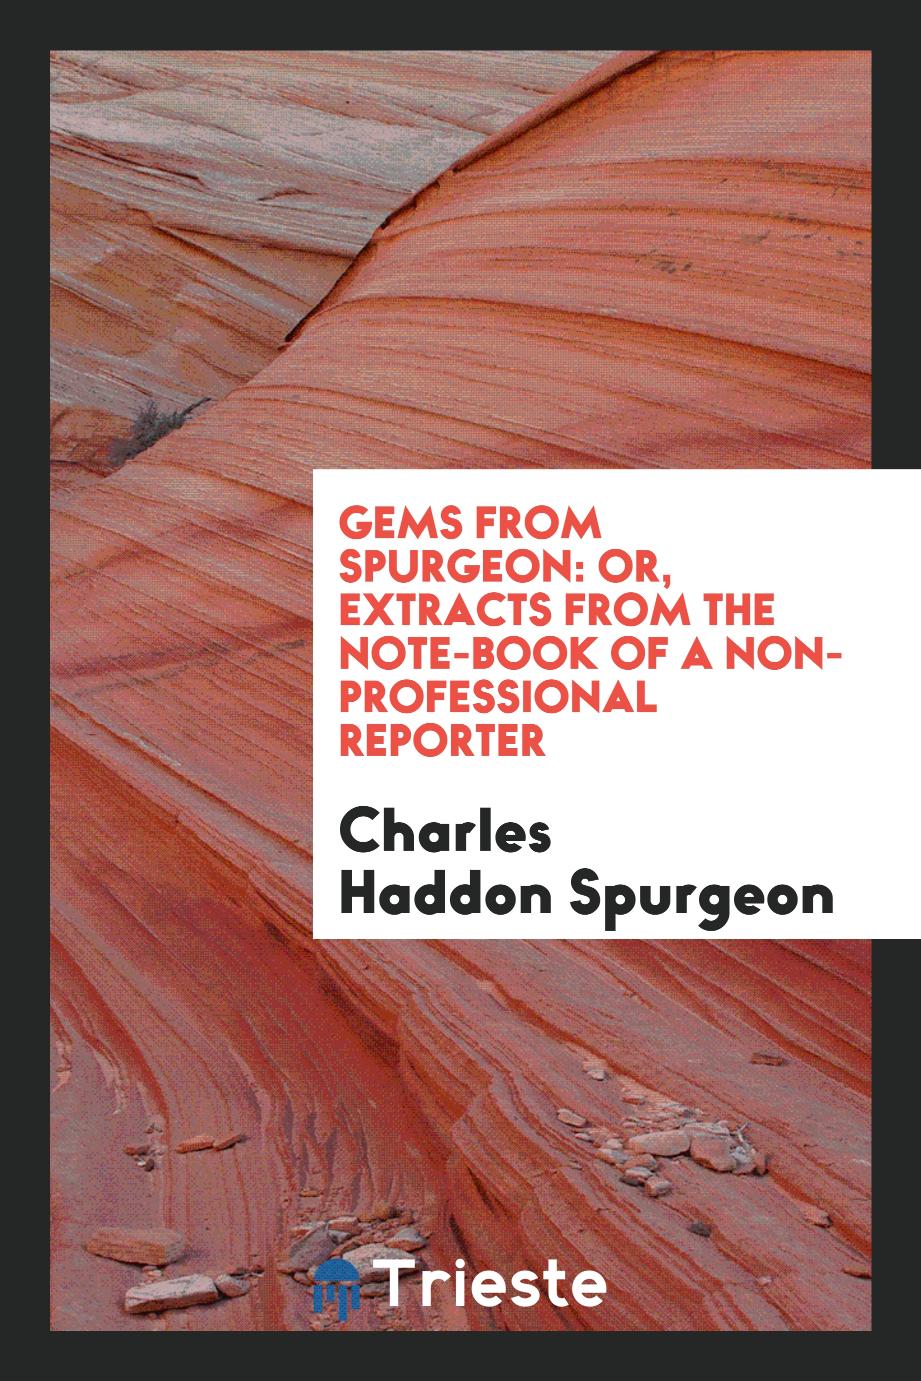 Gems from Spurgeon: or, Extracts from the note-book of a non-professional reporter